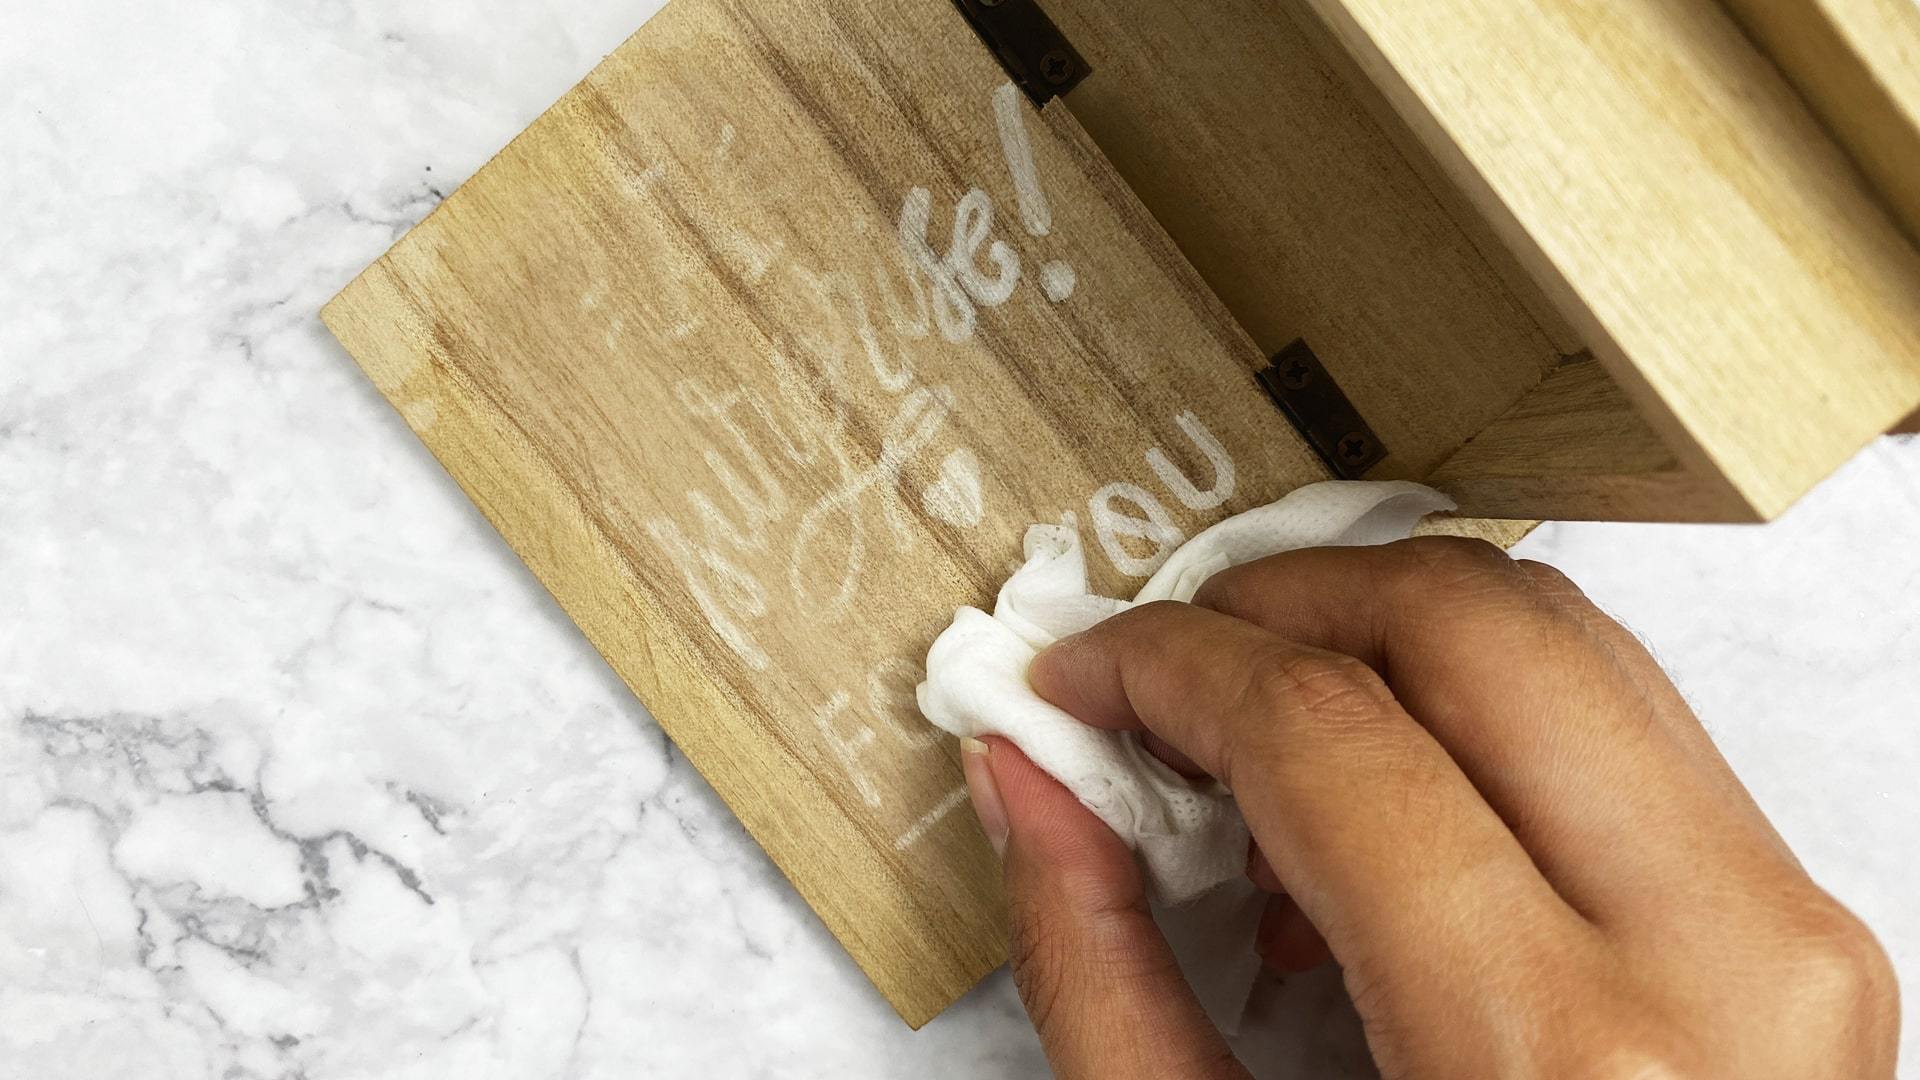 How To Remove Permanent Marker From Wood Surfaces